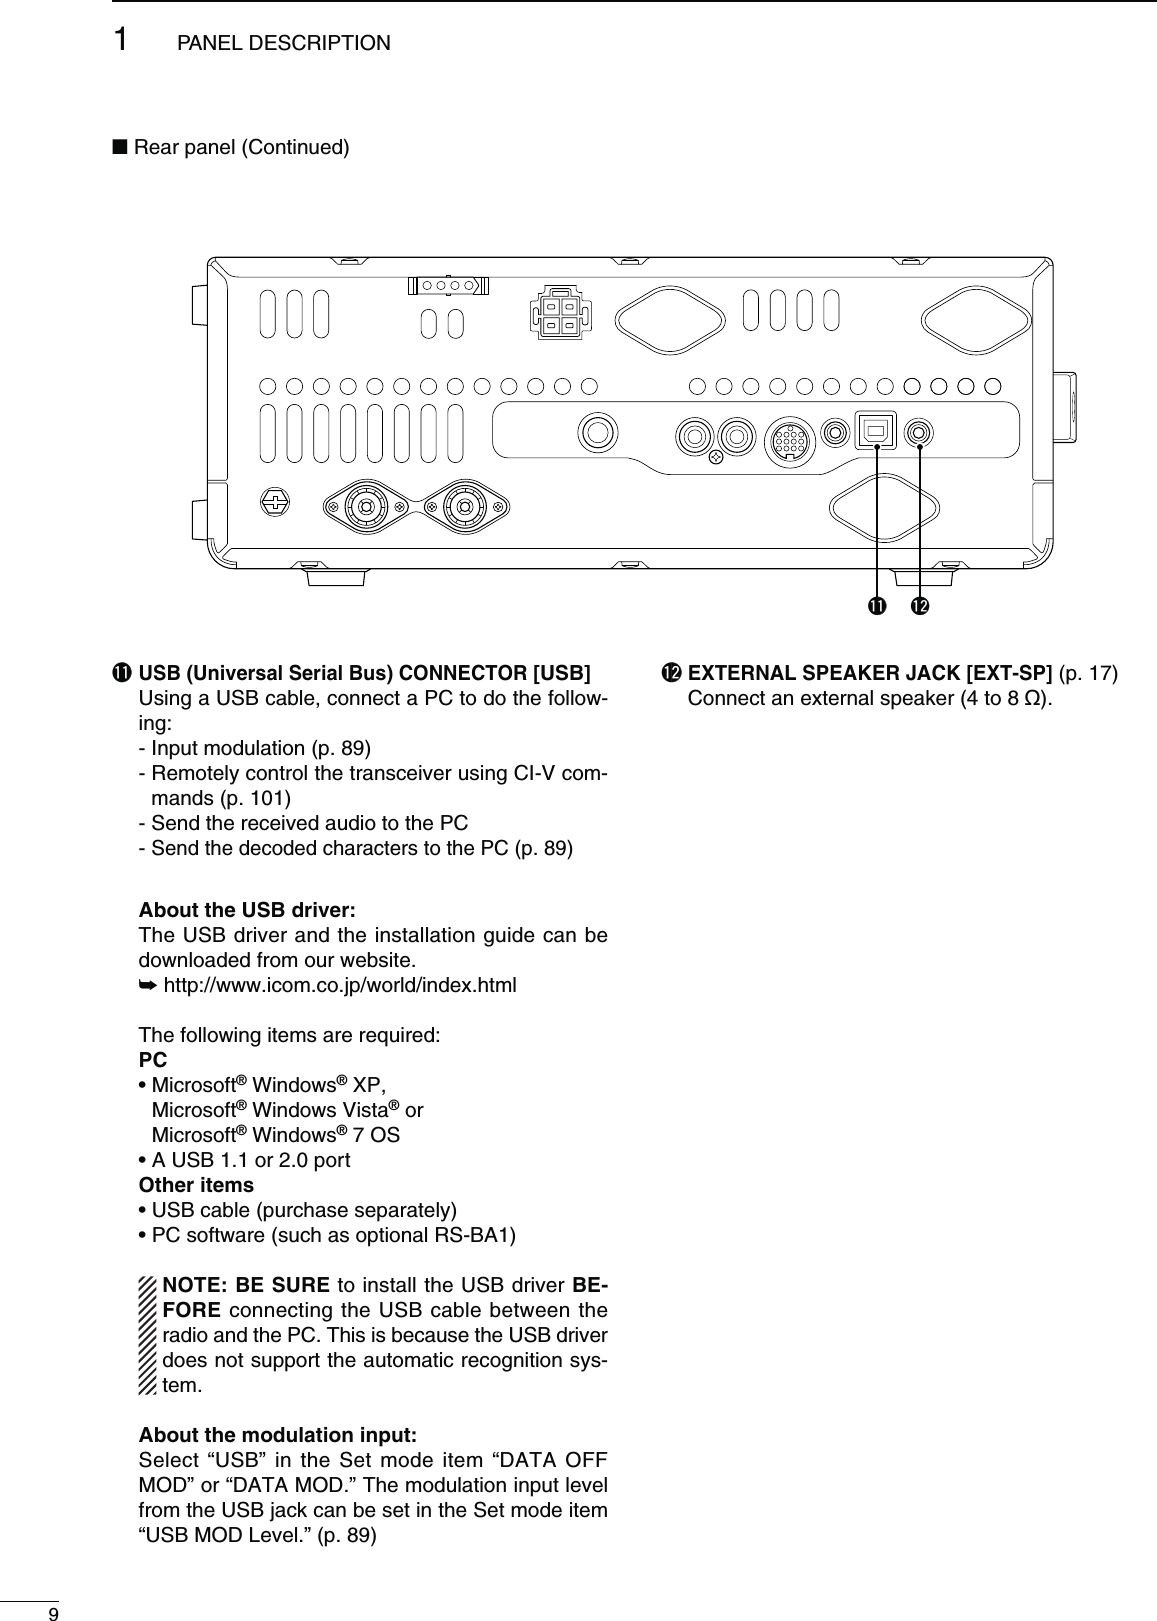 !153&quot;5NIVERSAL3ERIAL&quot;US#/..%#4/2;53&quot;=  Using a USB cable, connect a PC to do the follow-ing:  - Input modulation (p. 89) -  Remotely control the transceiver using CI-V com-mands (p. 101)  - Send the received audio to the PC -  Send the decoded characters to the PC (p. 89) !BOUTTHE53&quot;DRIVER  The USB driver and the installation guide can be downloaded from our website. ± http://www.icom.co.jp/world/index.html  The following items are required: PC s-ICROSOFT® Windows® XP, Microsoft® Windows Vista® or Microsoft® Windows® 7 OS s!53&quot;ORPORT /THERITEMS s53&quot;CABLEPURCHASESEPARATELY s0#SOFTWARESUCHASOPTIONAL23&quot;! ./4%&quot;%352%to install the USB driver &quot;%-FORE connecting the USB cable between the radio and the PC. This is because the USB driver does not support the automatic recognition sys-tem. !BOUTTHEMODULATIONINPUT  Select “USB” in the Set mode item “DATA OFF MOD” or “DATA MOD.” The modulation input level from the USB jack can be set in the Set mode item “USB MOD Level.” (p. 89)!2  EXTERNAL SPEAKER JACK [EXT-SP] (p. 17)  Connect an external speaker (4 to 8 ø).  91PANEL DESCRIPTION!2N Rear panel (Continued)!1